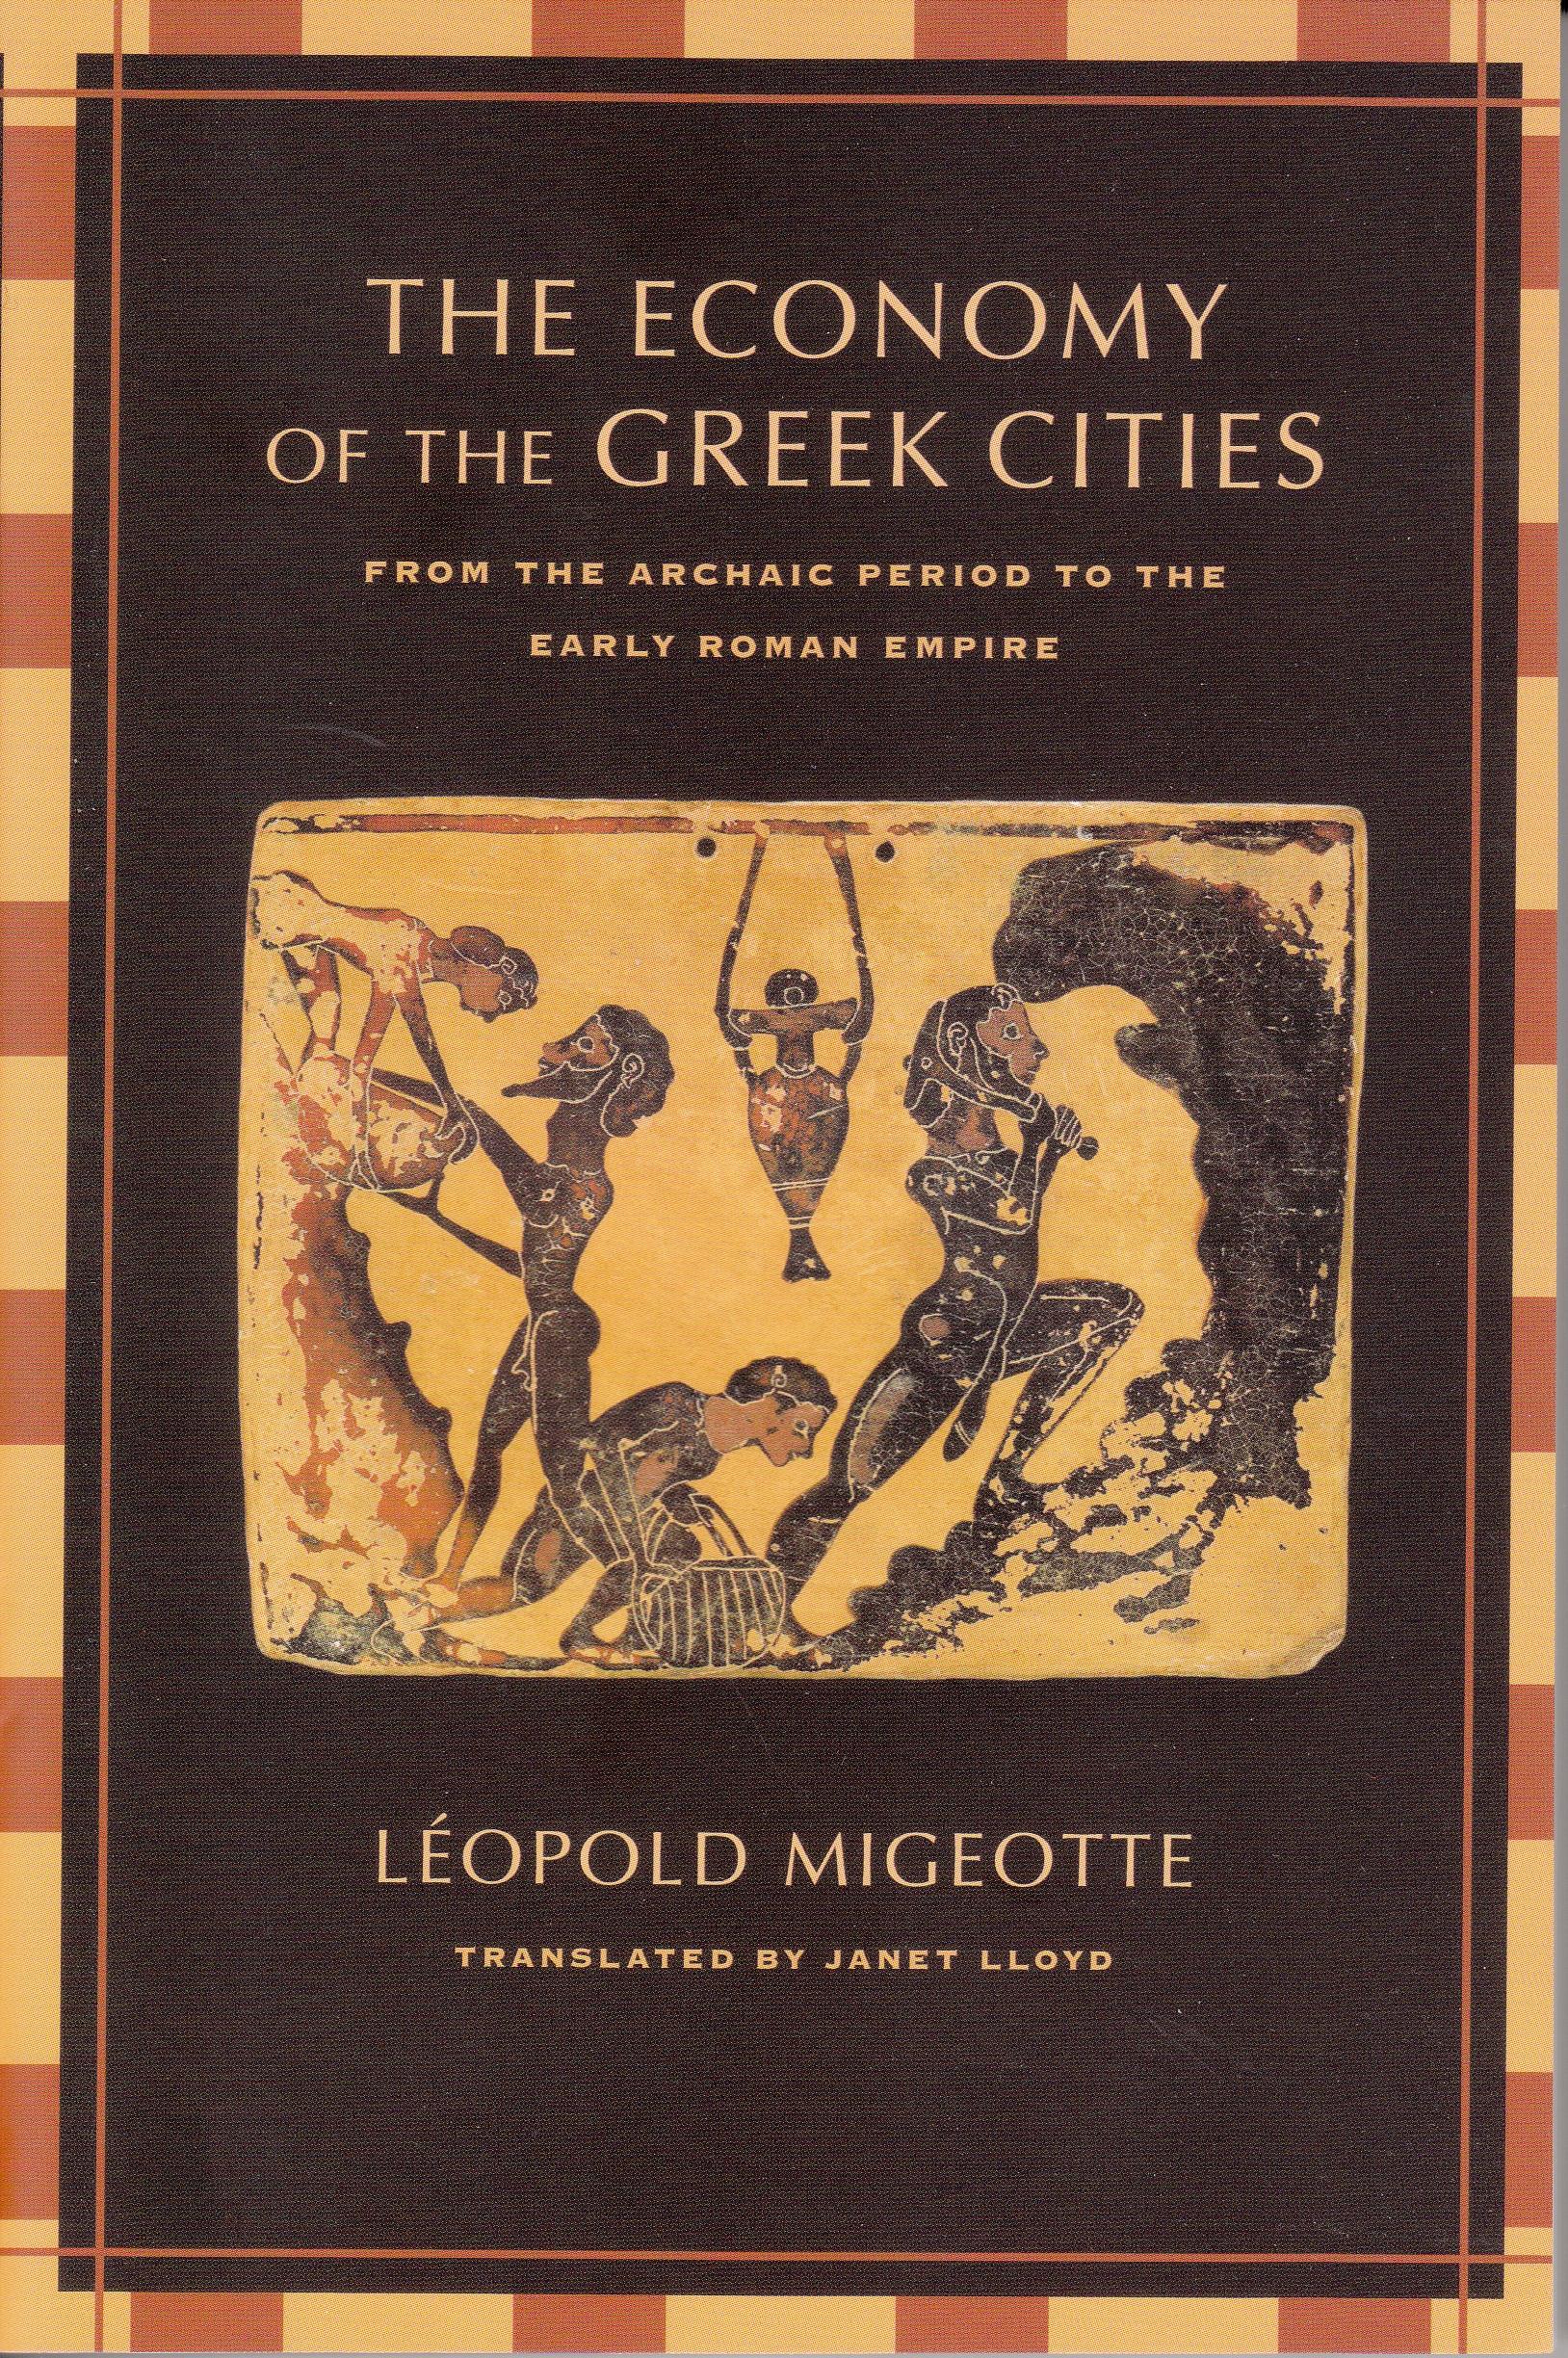 The Economy Of The Greek Cities "From The Archaic Period To The Early Roman Empire"